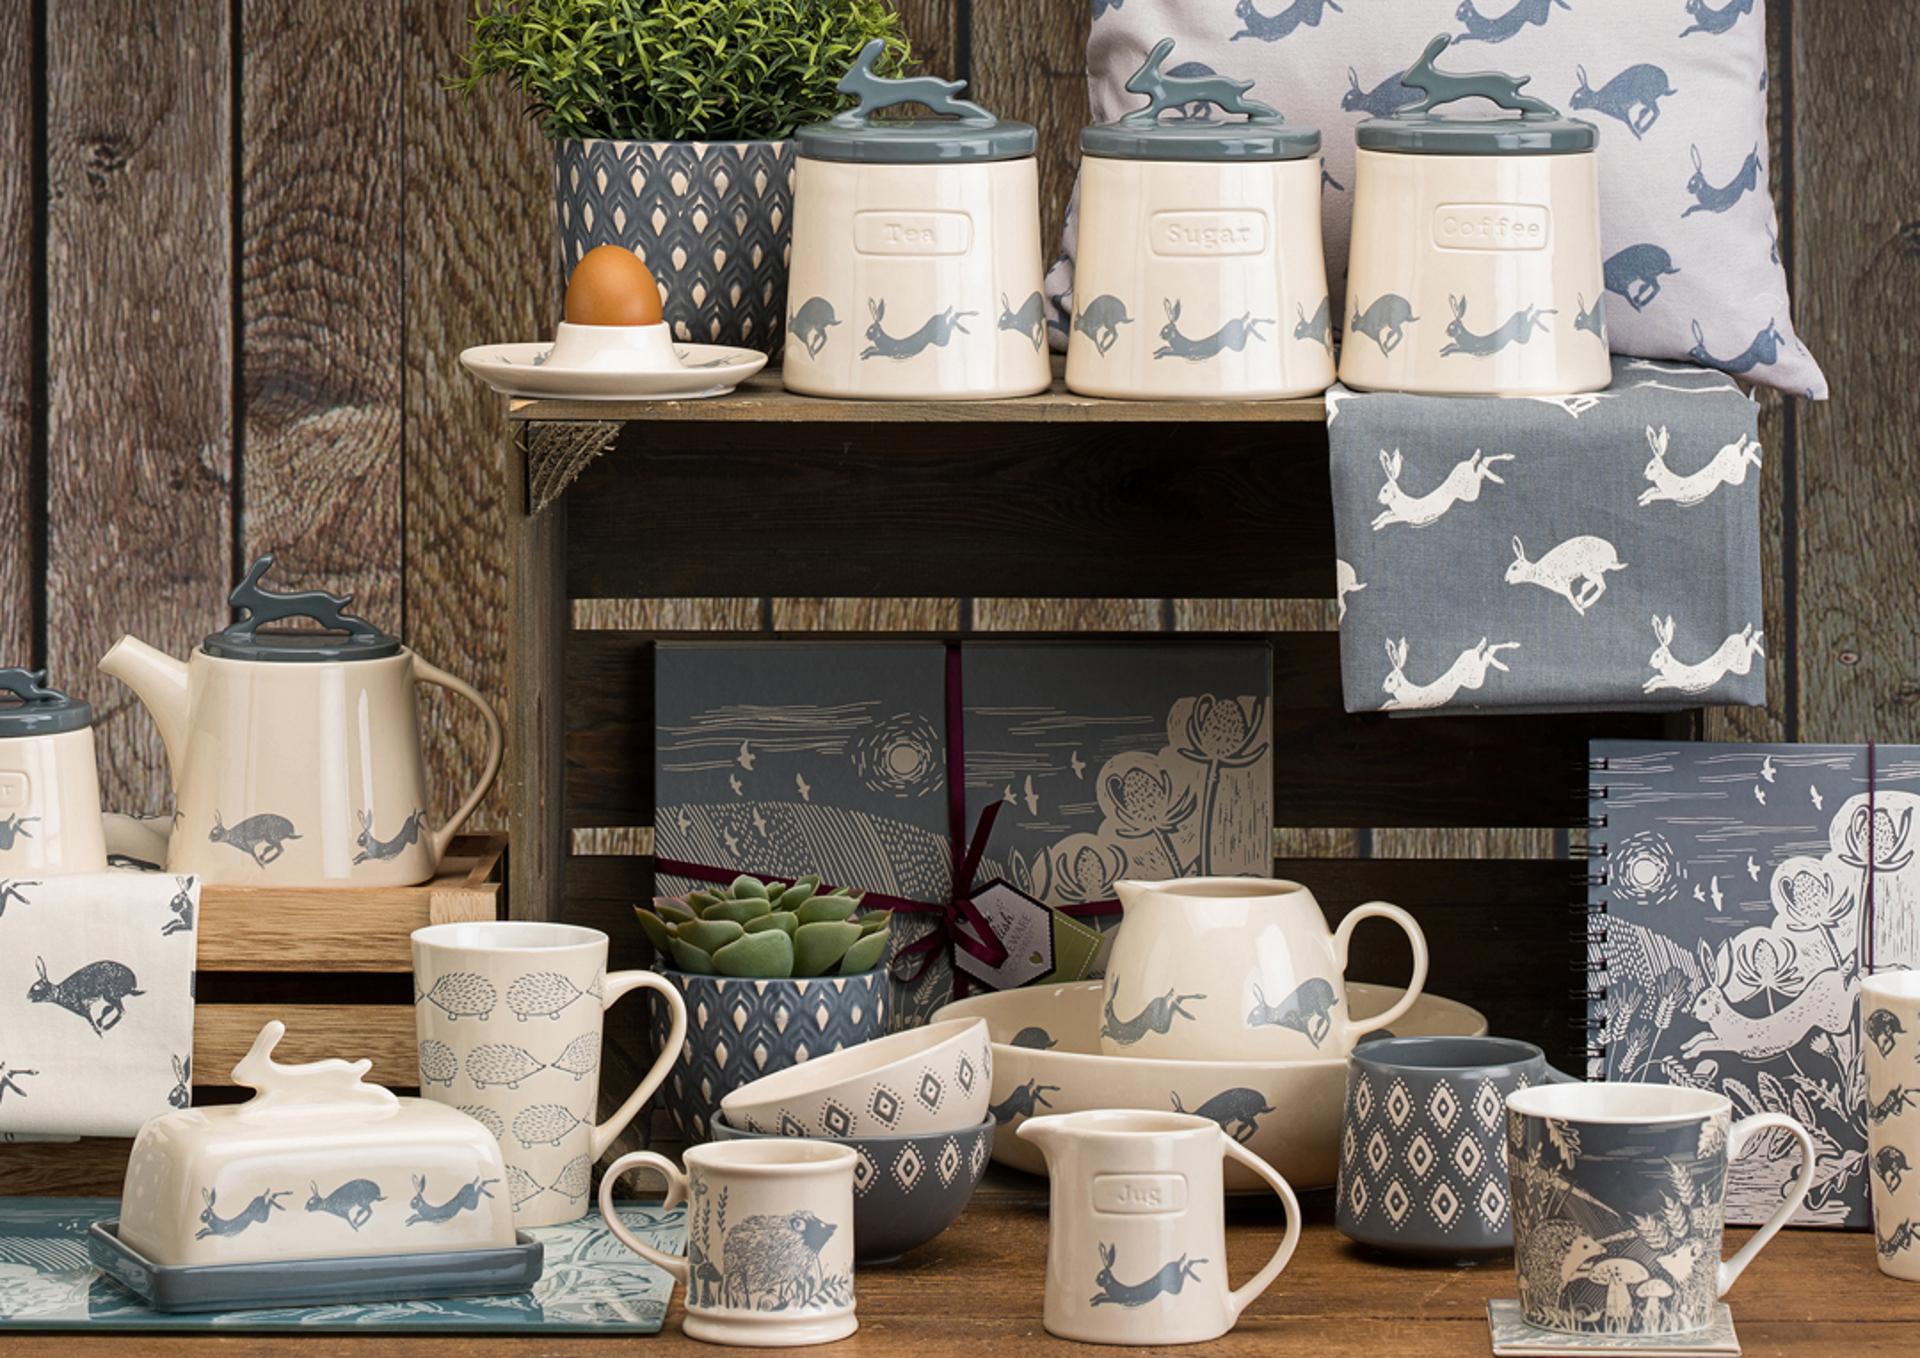 Baaj Capital funds acquisition of homeware designer out of administration